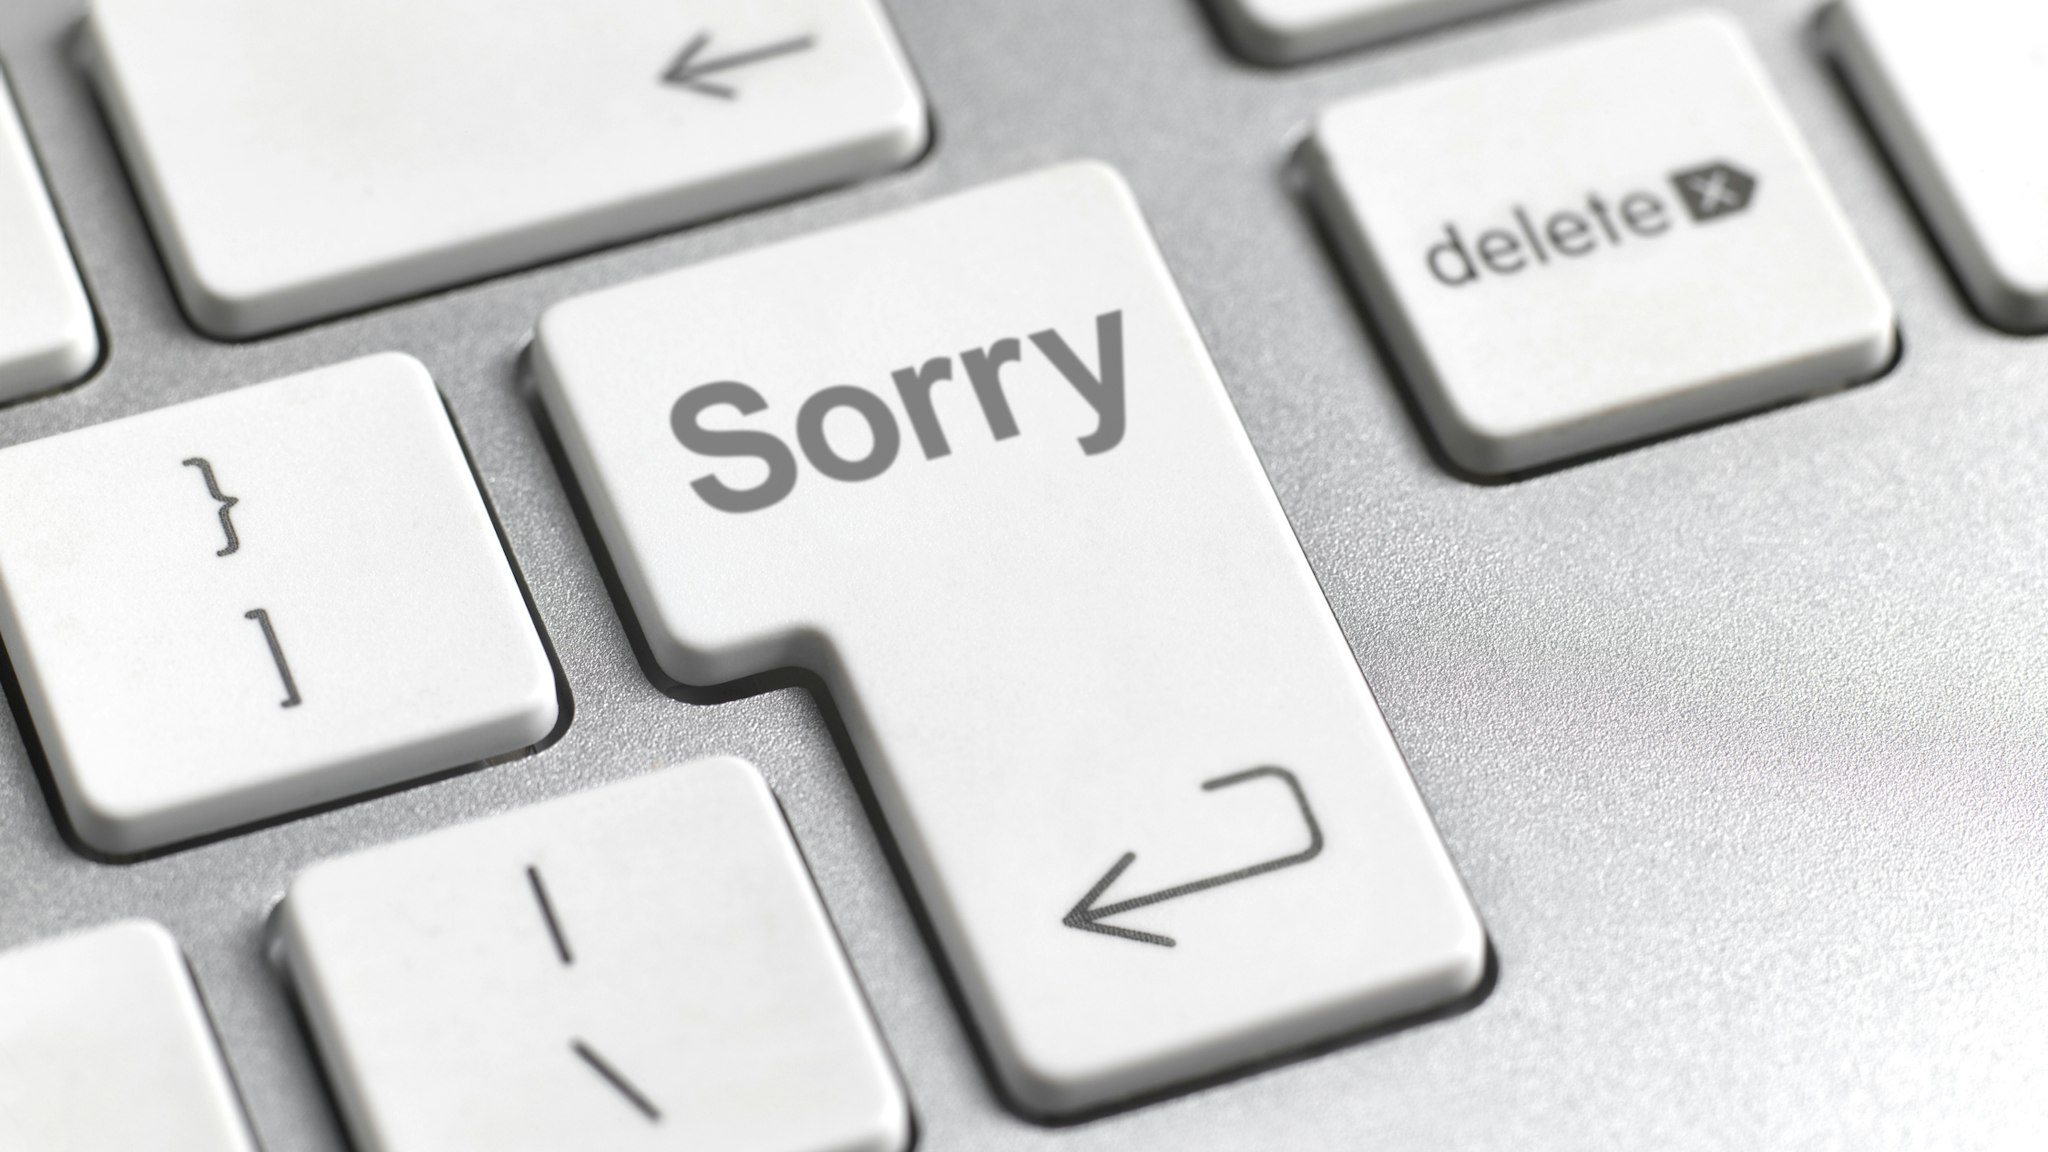 Sorry on computer keyboard